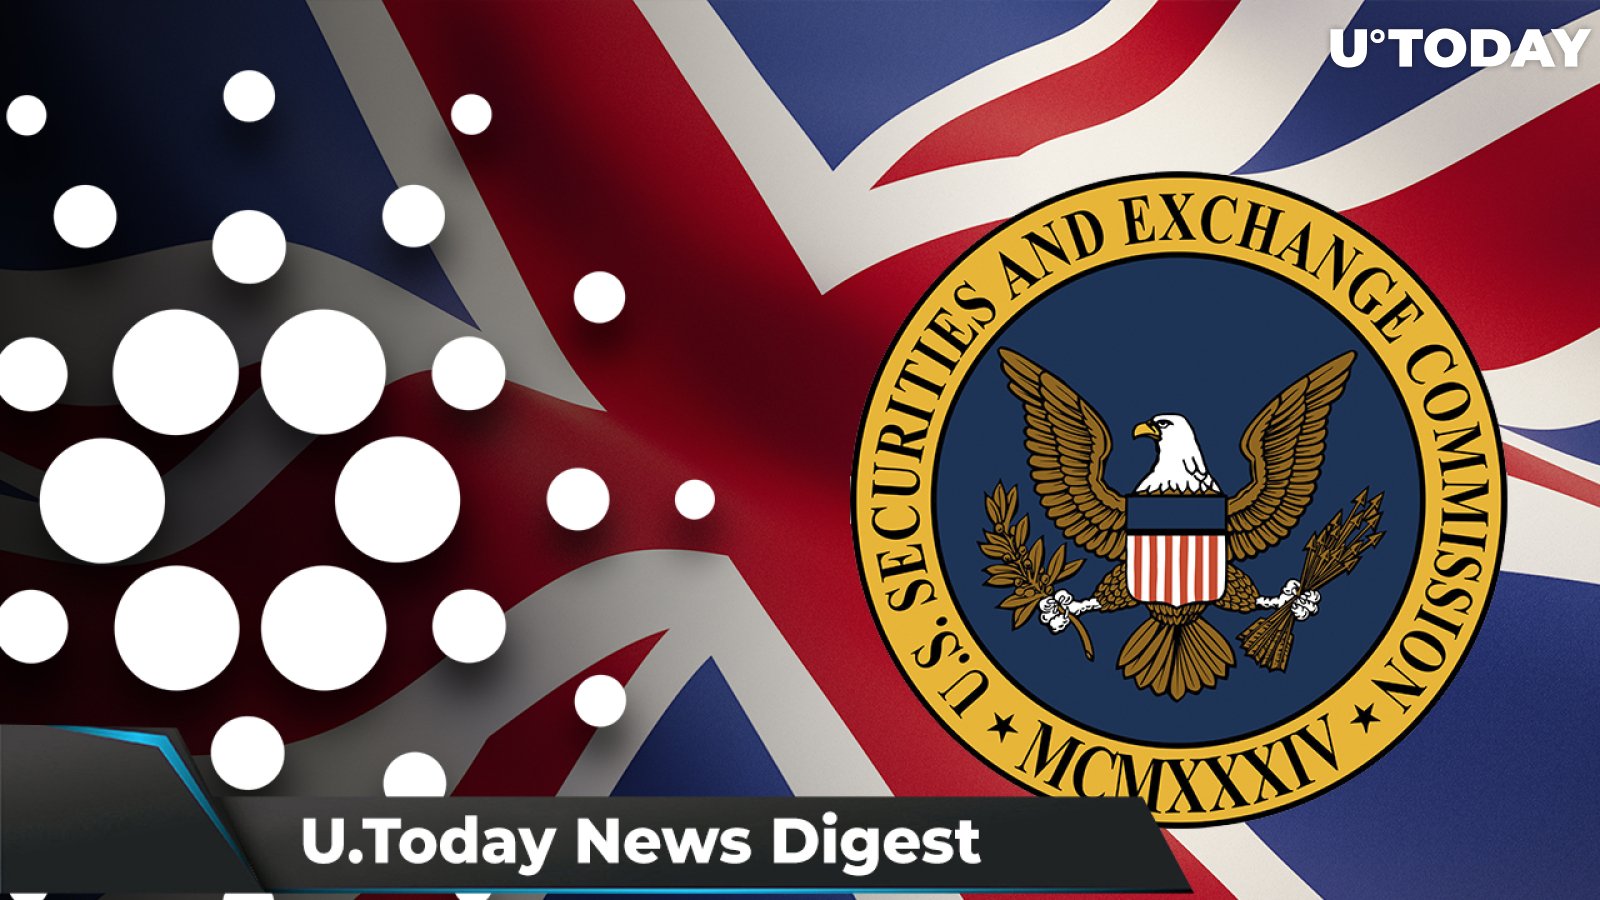 SHIB Now Option for Transacting in UK, Cardano On-Chain Activity Spikes, SEC Boss Explains Spot Bitcoin ETF Refusal: Crypto News Digest by U.Today